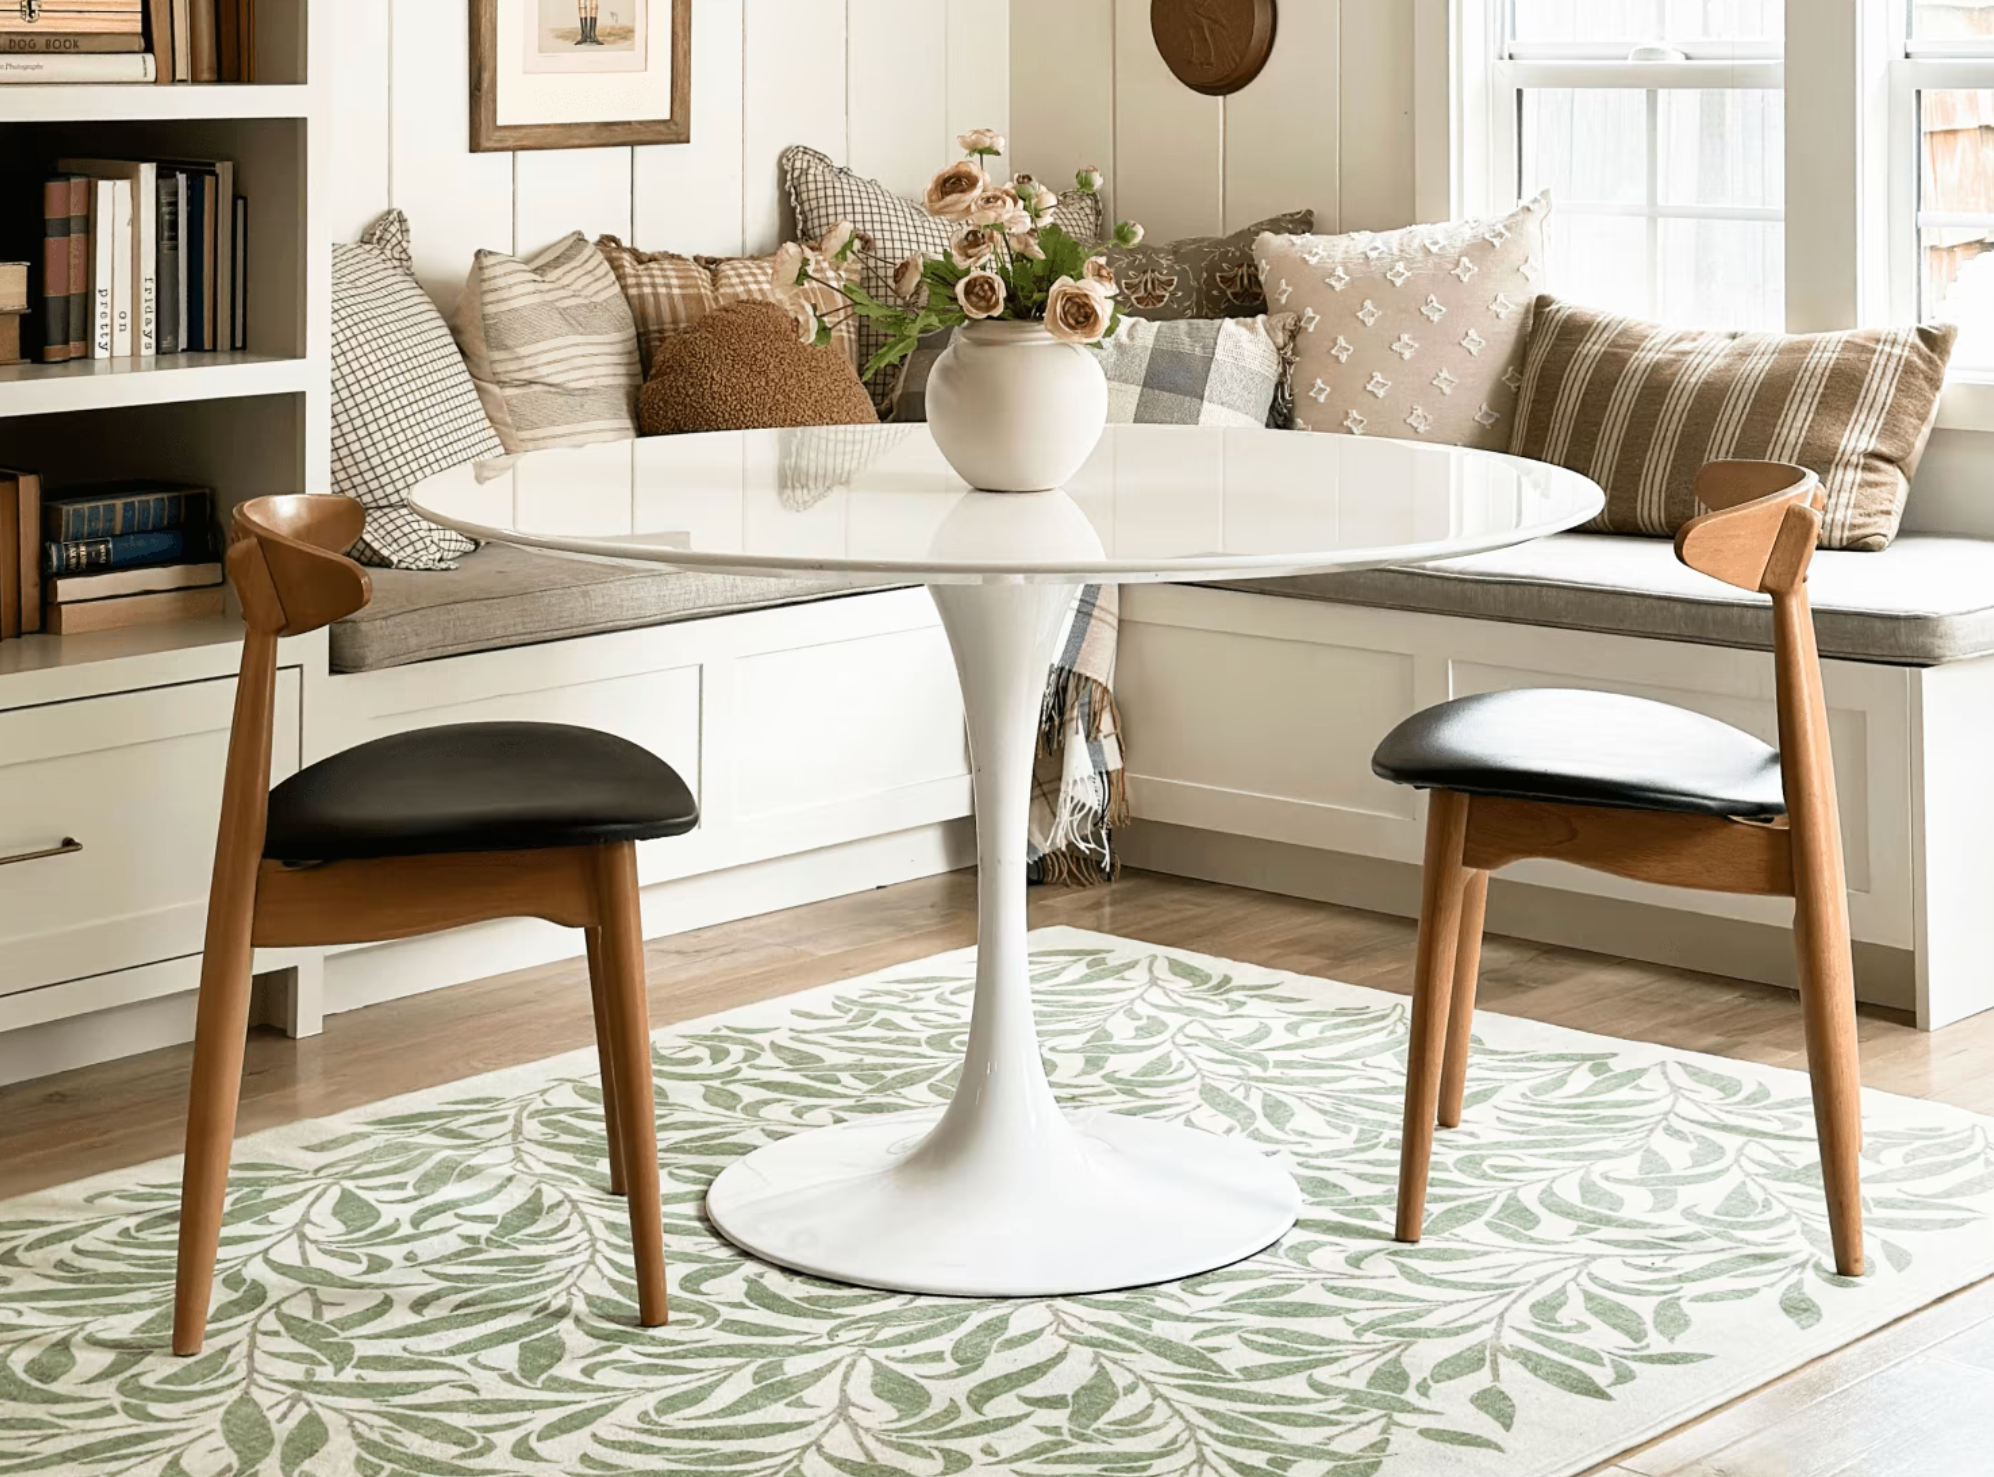 A round pedestal table in a styled dining nook with a nontoxic Ruggable rug. 